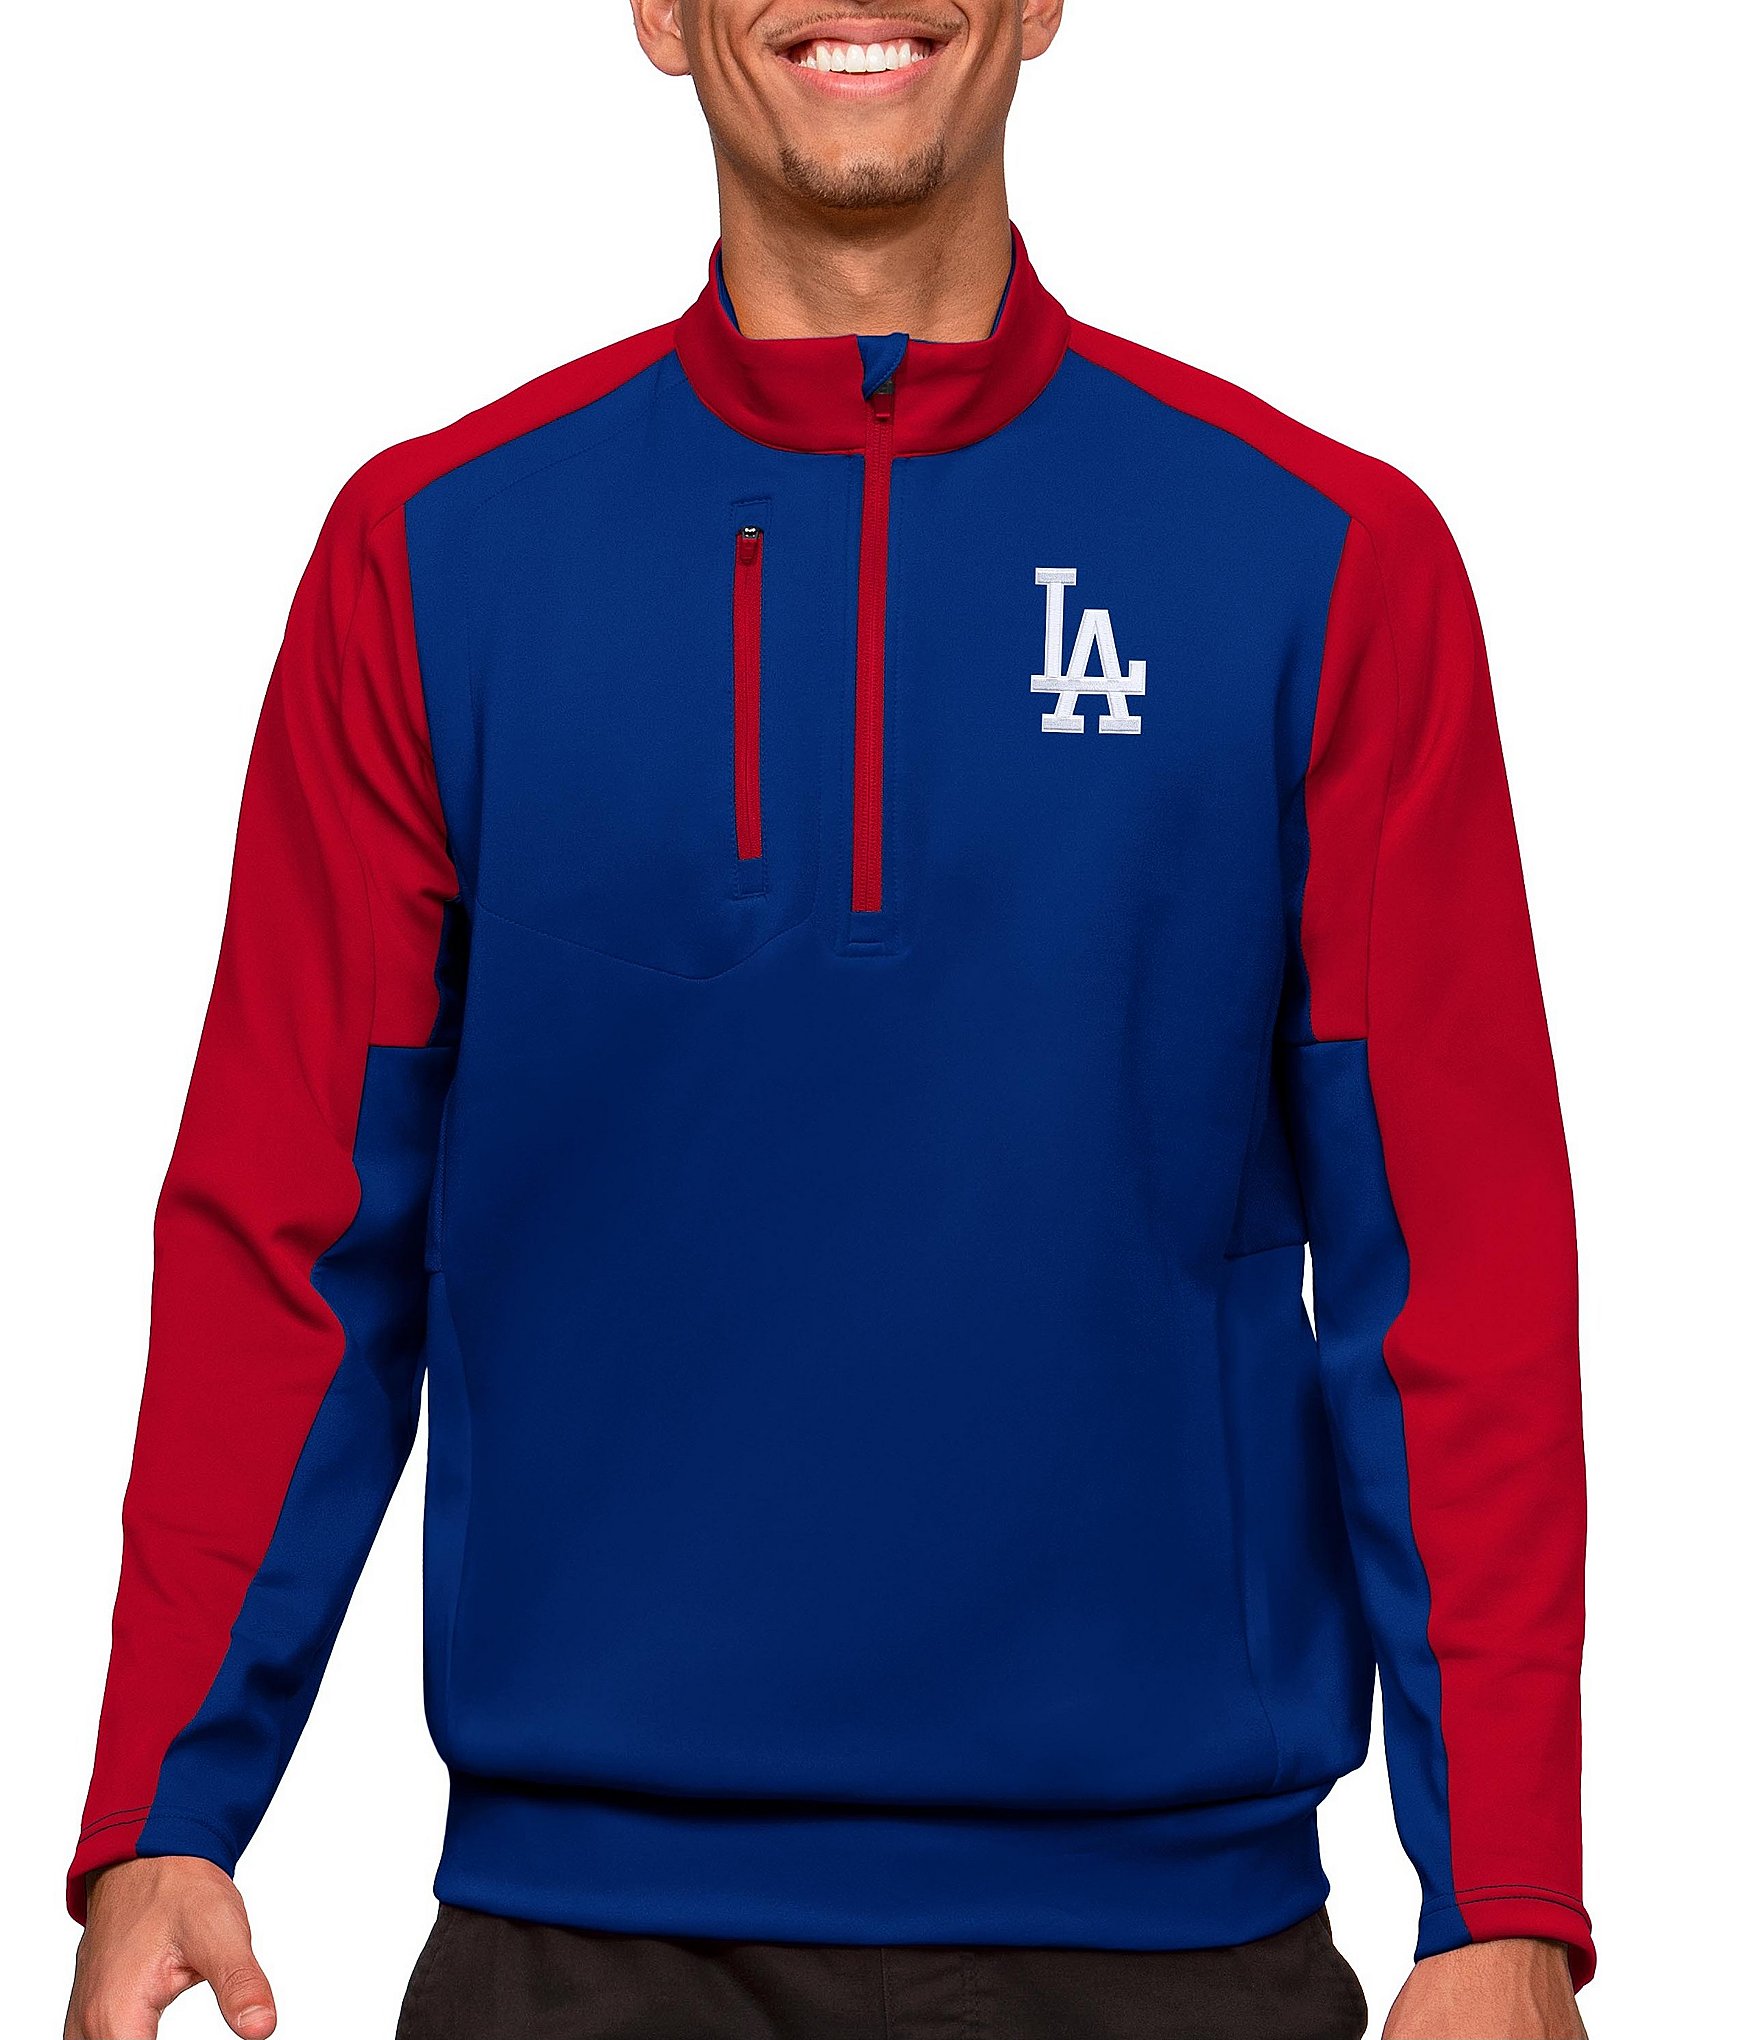 Los Angeles Dodgers Antigua Blue Victory Pullover Hoodie S